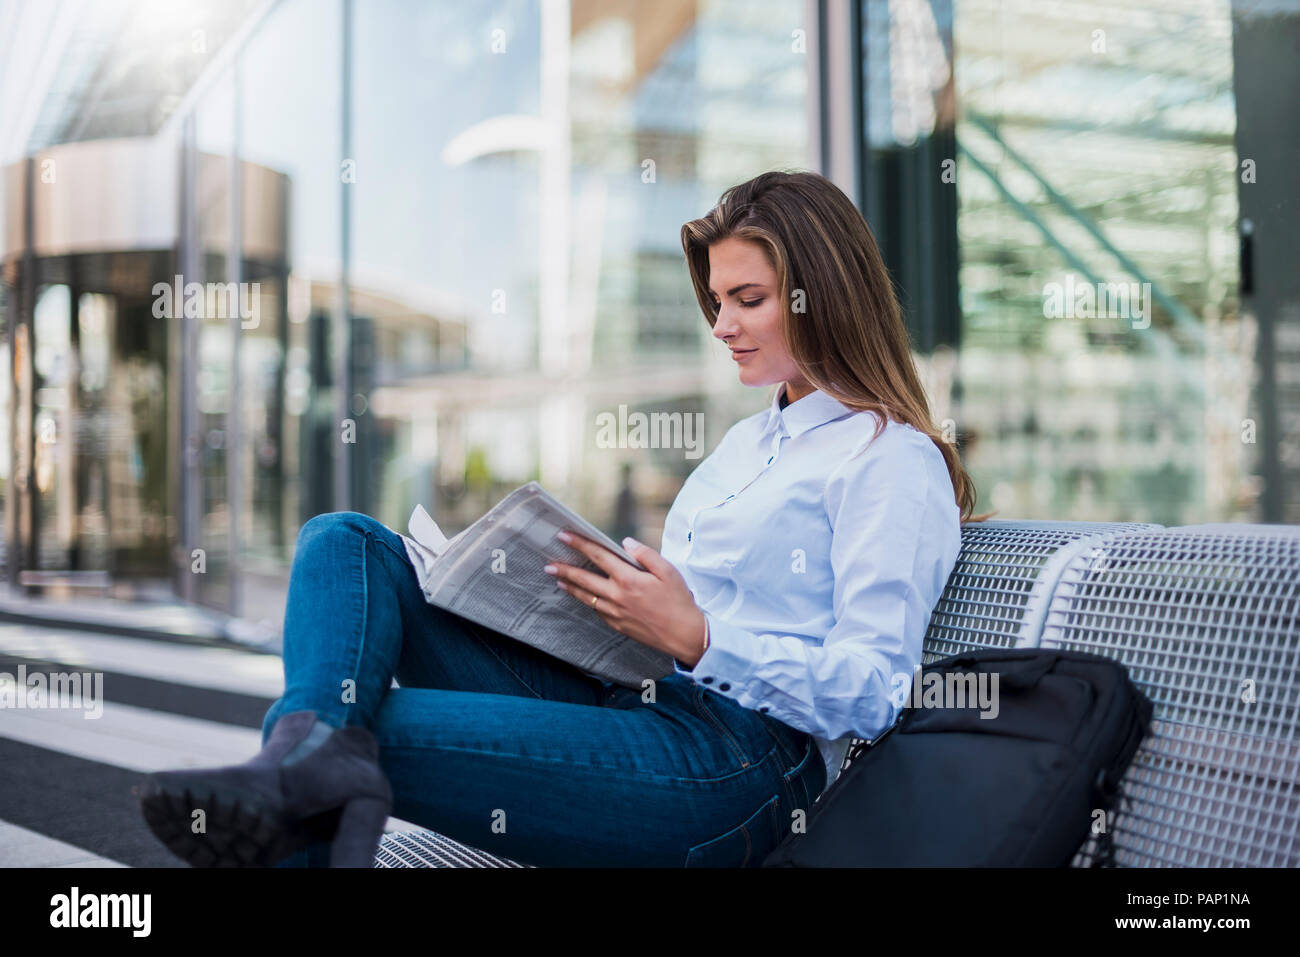 Portrait of young businesswoman sitting on bench reading newspaper Stock Photo